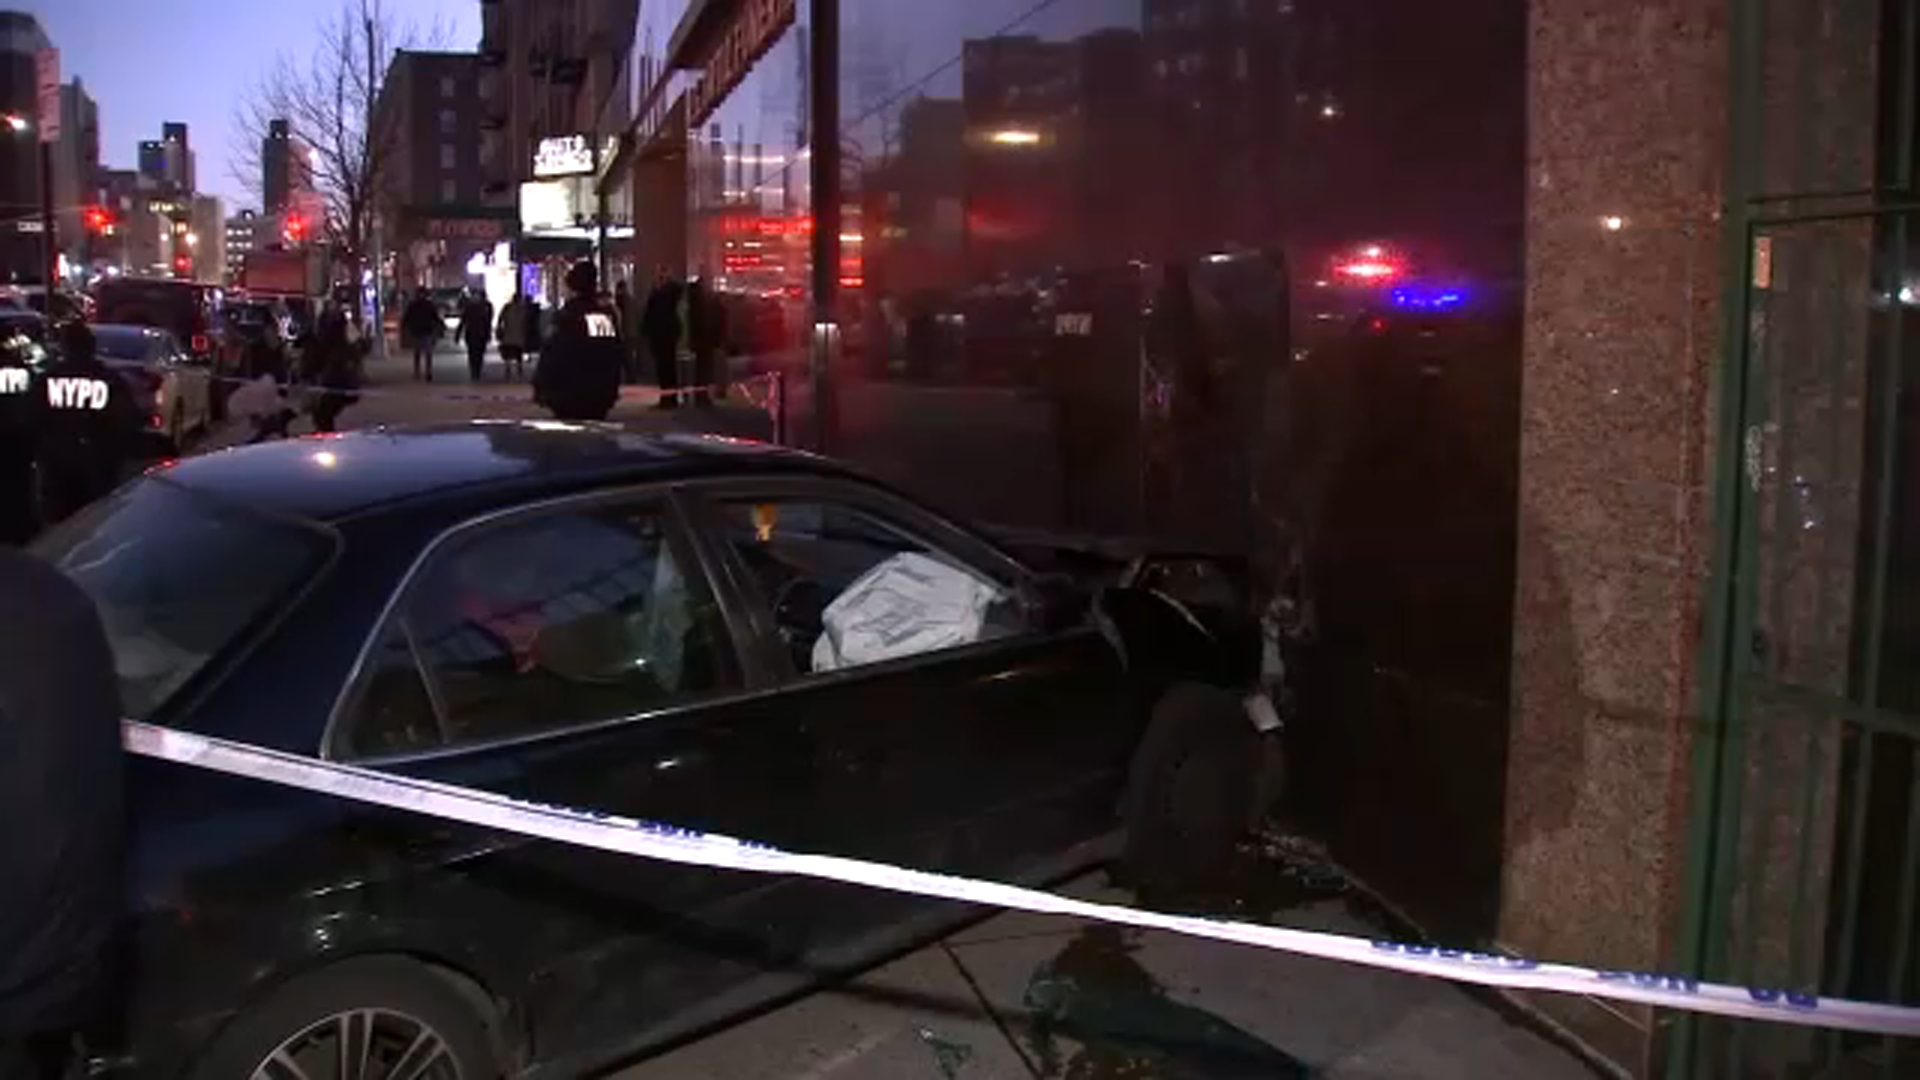 6 people, including 2 kids, struck by out-of-control vehicle in Washington Heights